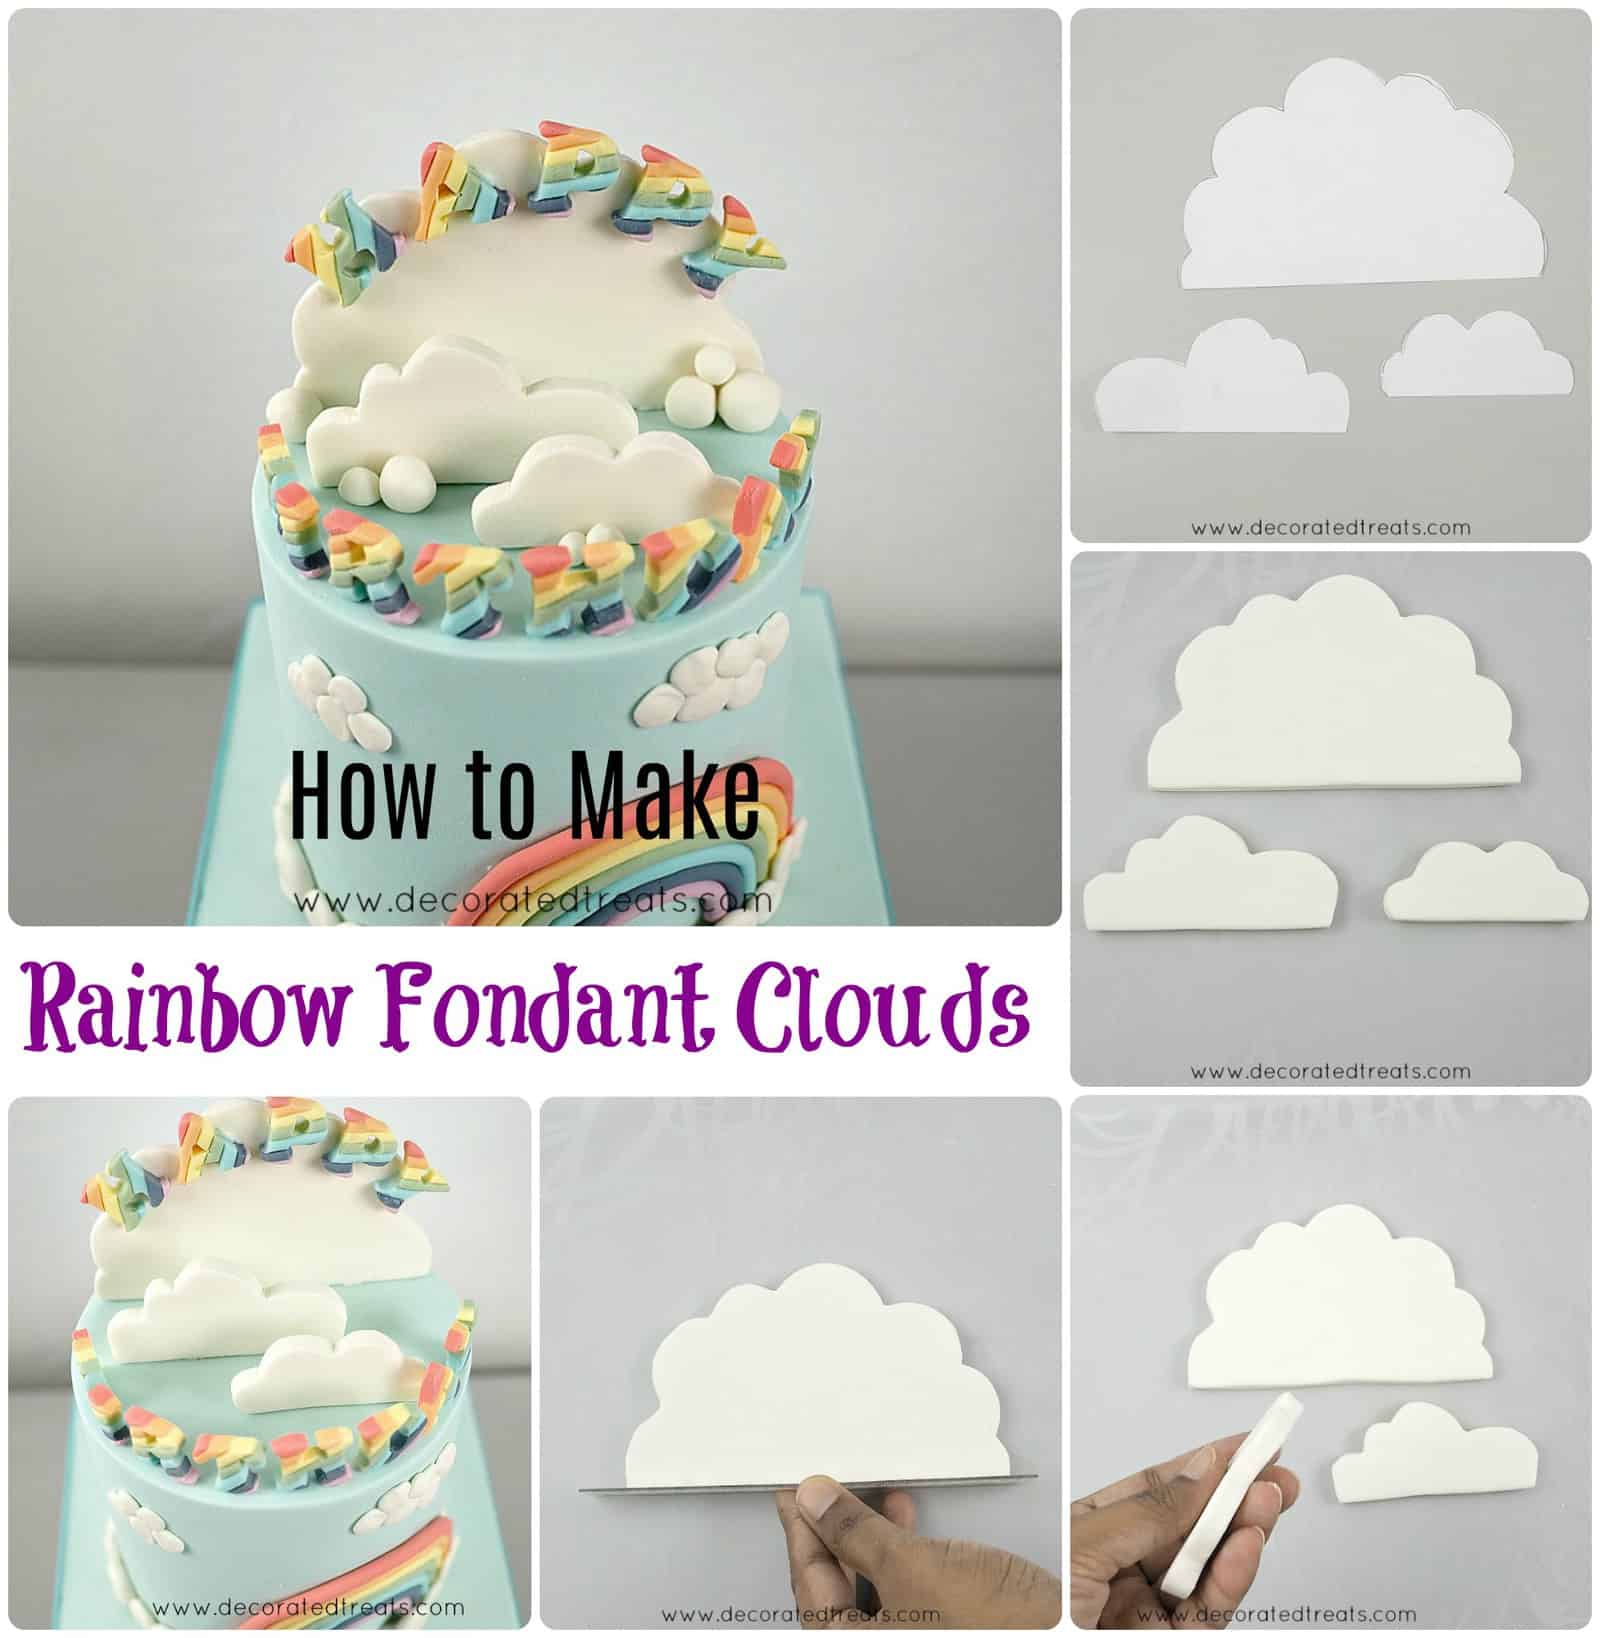 Poster for rainbow fondant clouds